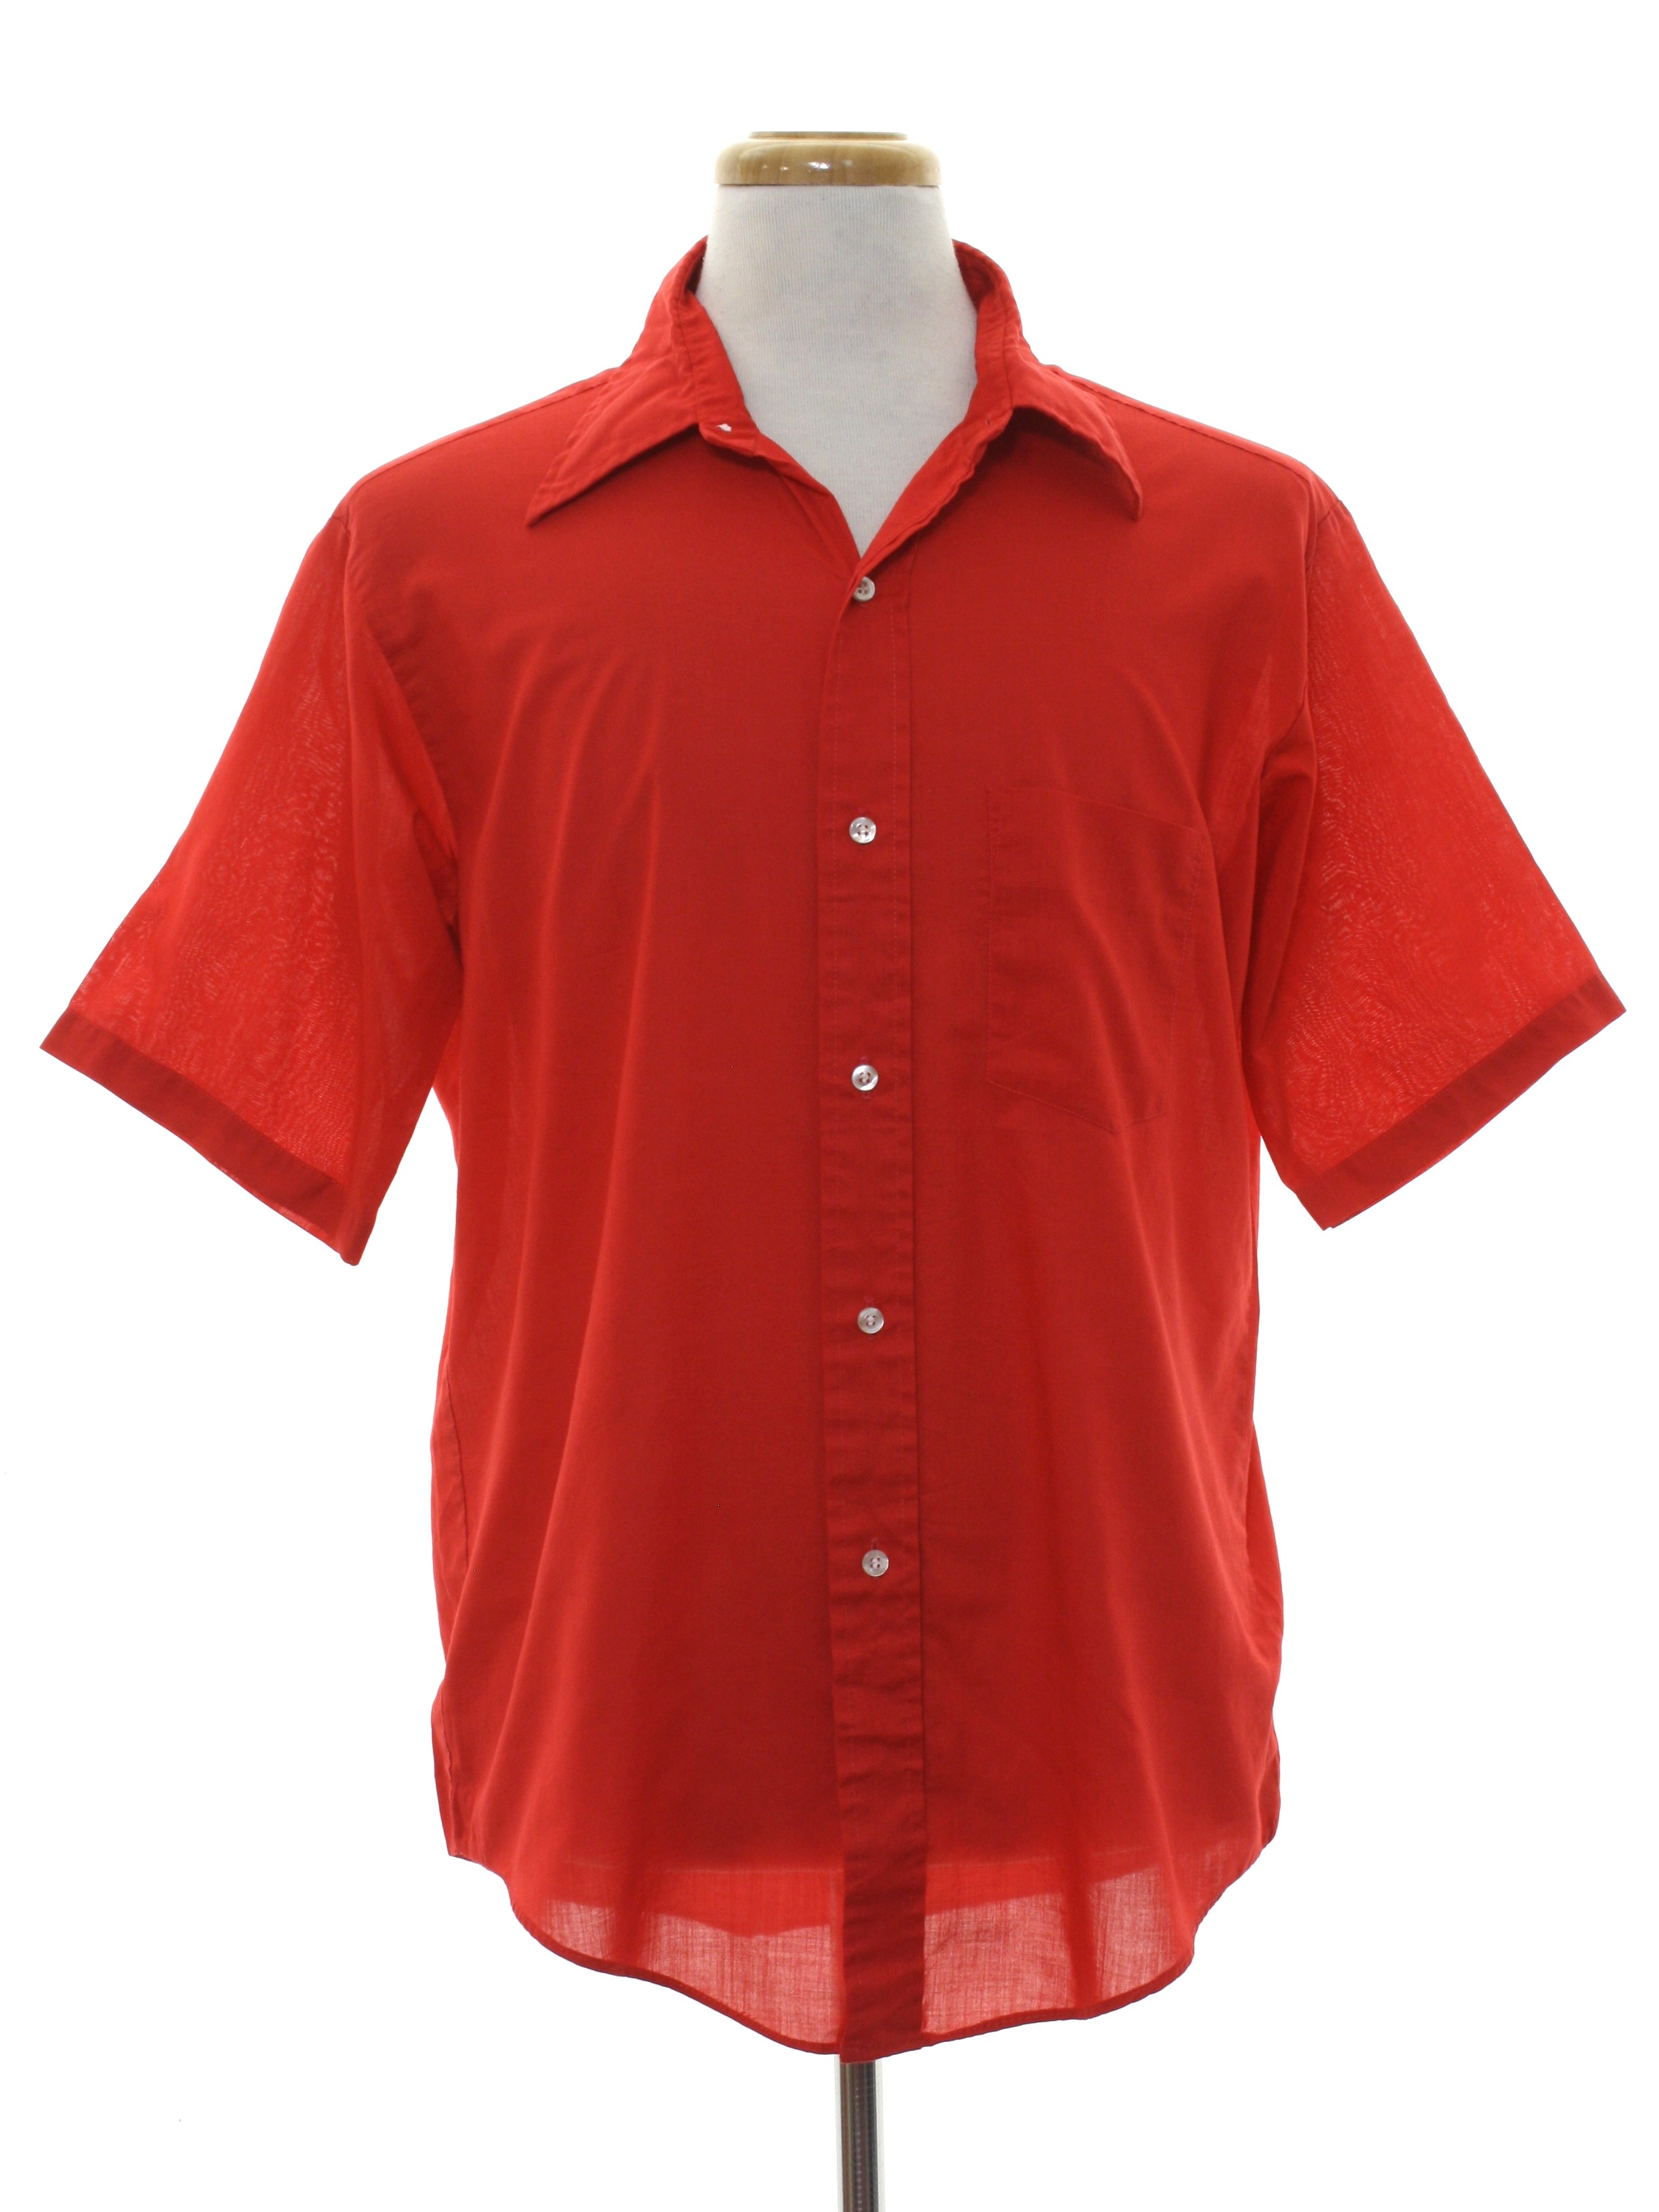 mens red short sleeve button up